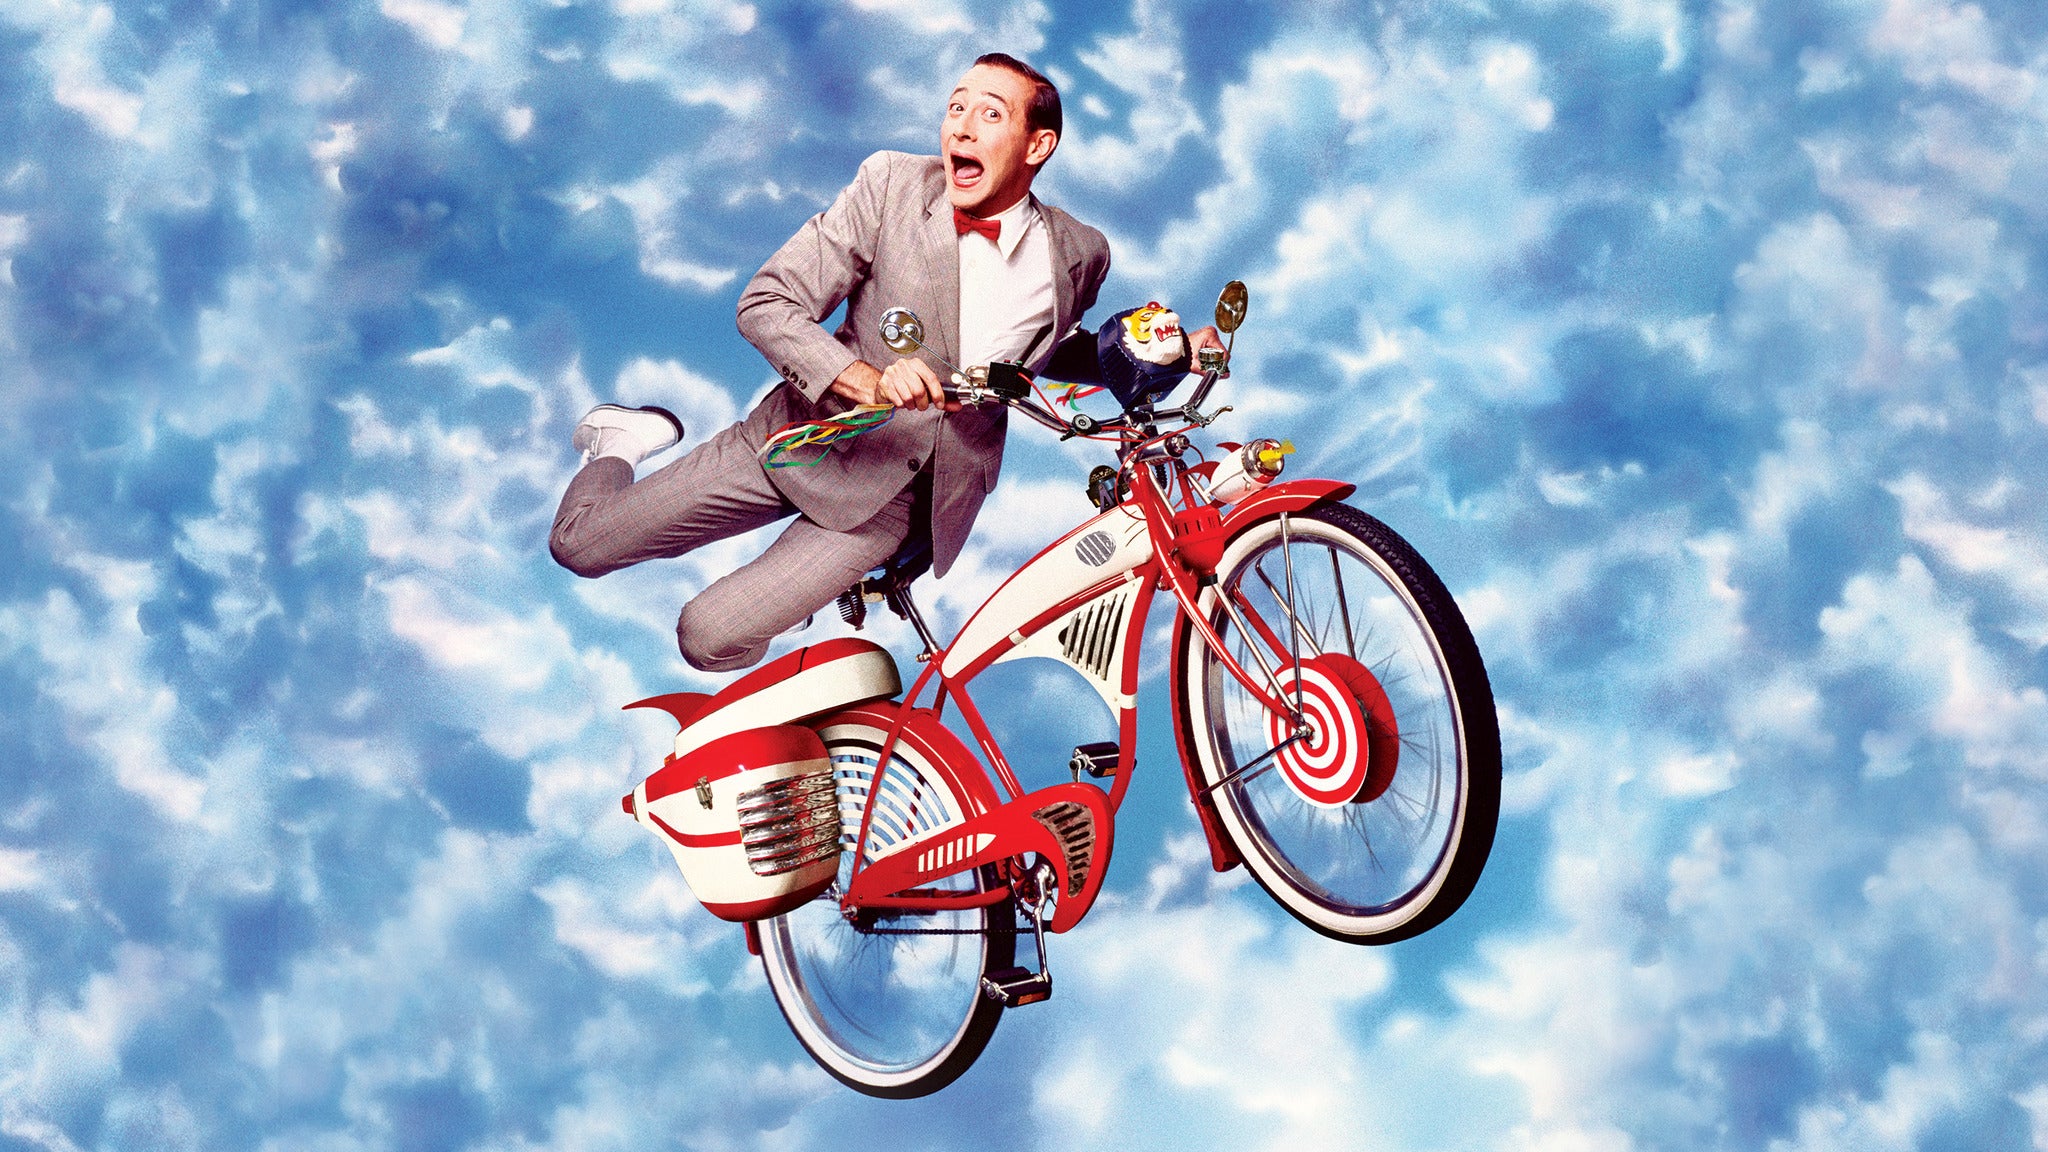 Pee-wee's Big Adventure 35th Anniversary Tour with Paul Reubens in New York promo photo for Live Nation presale offer code